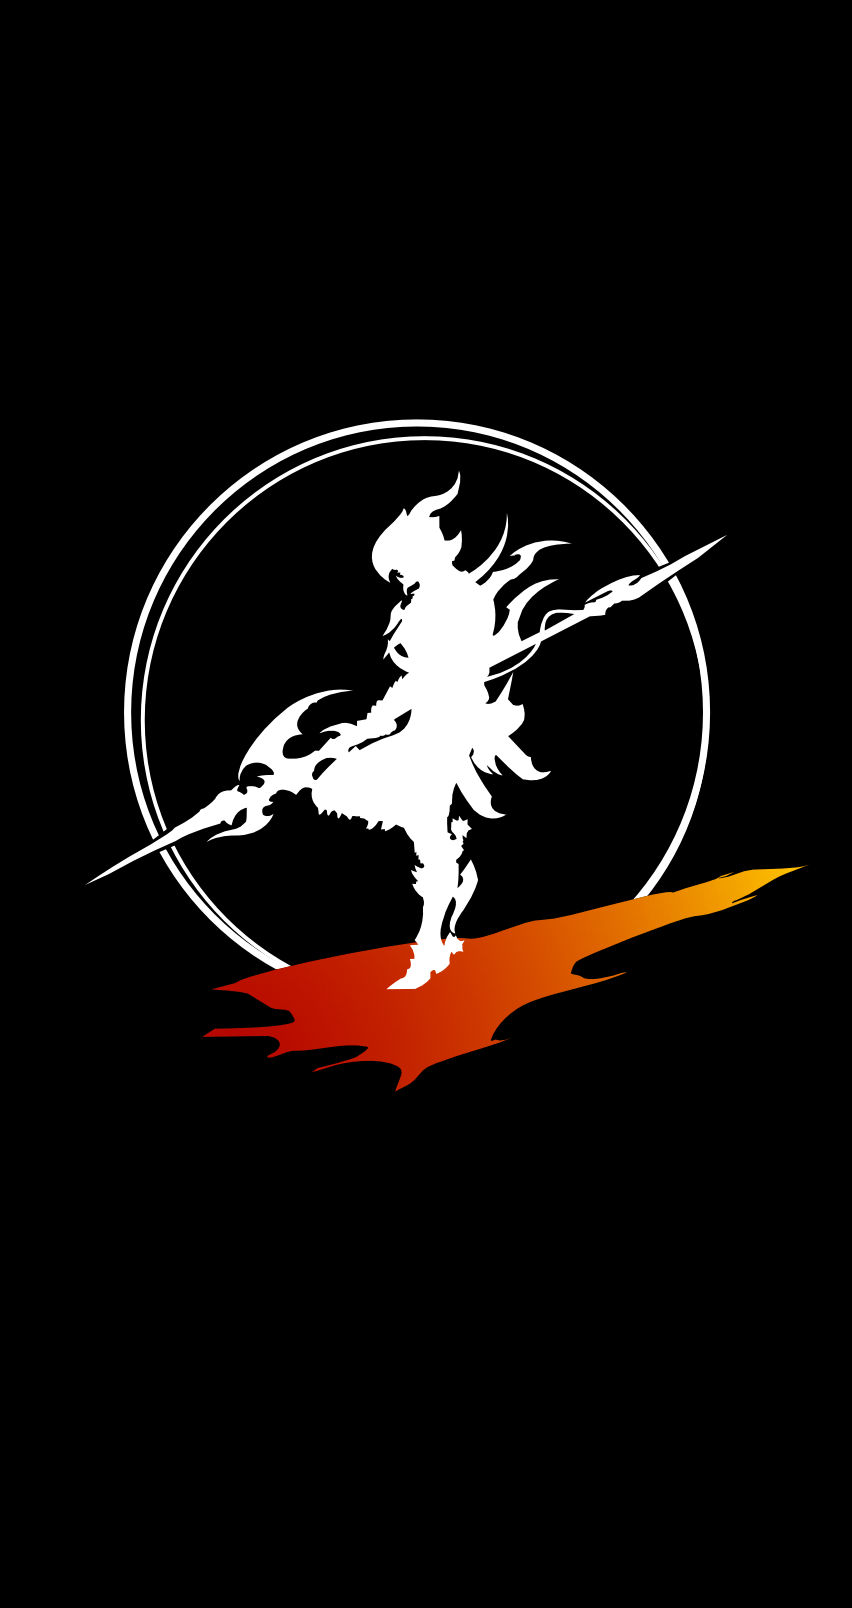 Made this dragoon wallpaper for my phone while I was bored at work. Snag it if you like it!